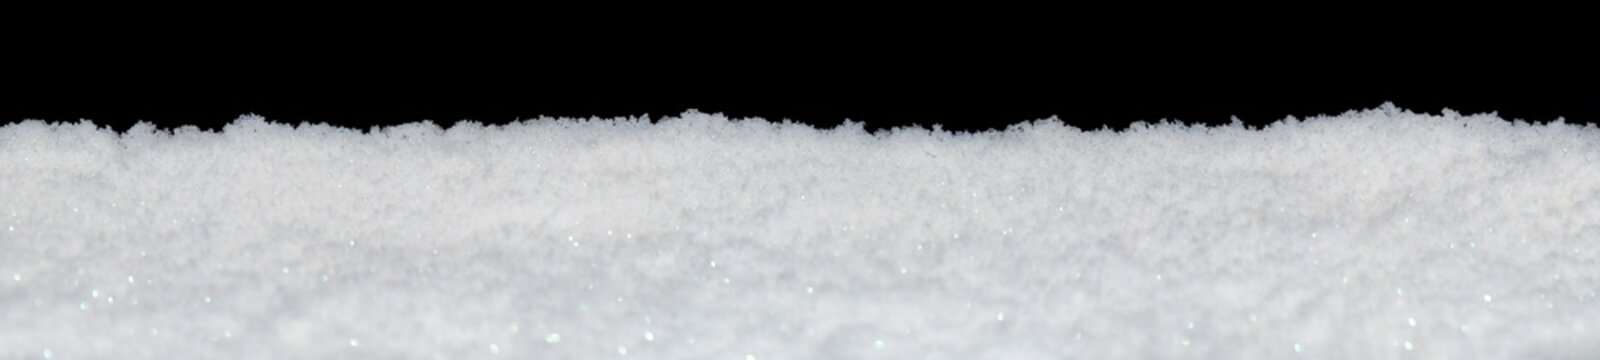 Banner of sparkling fluffy white snow isolated on black